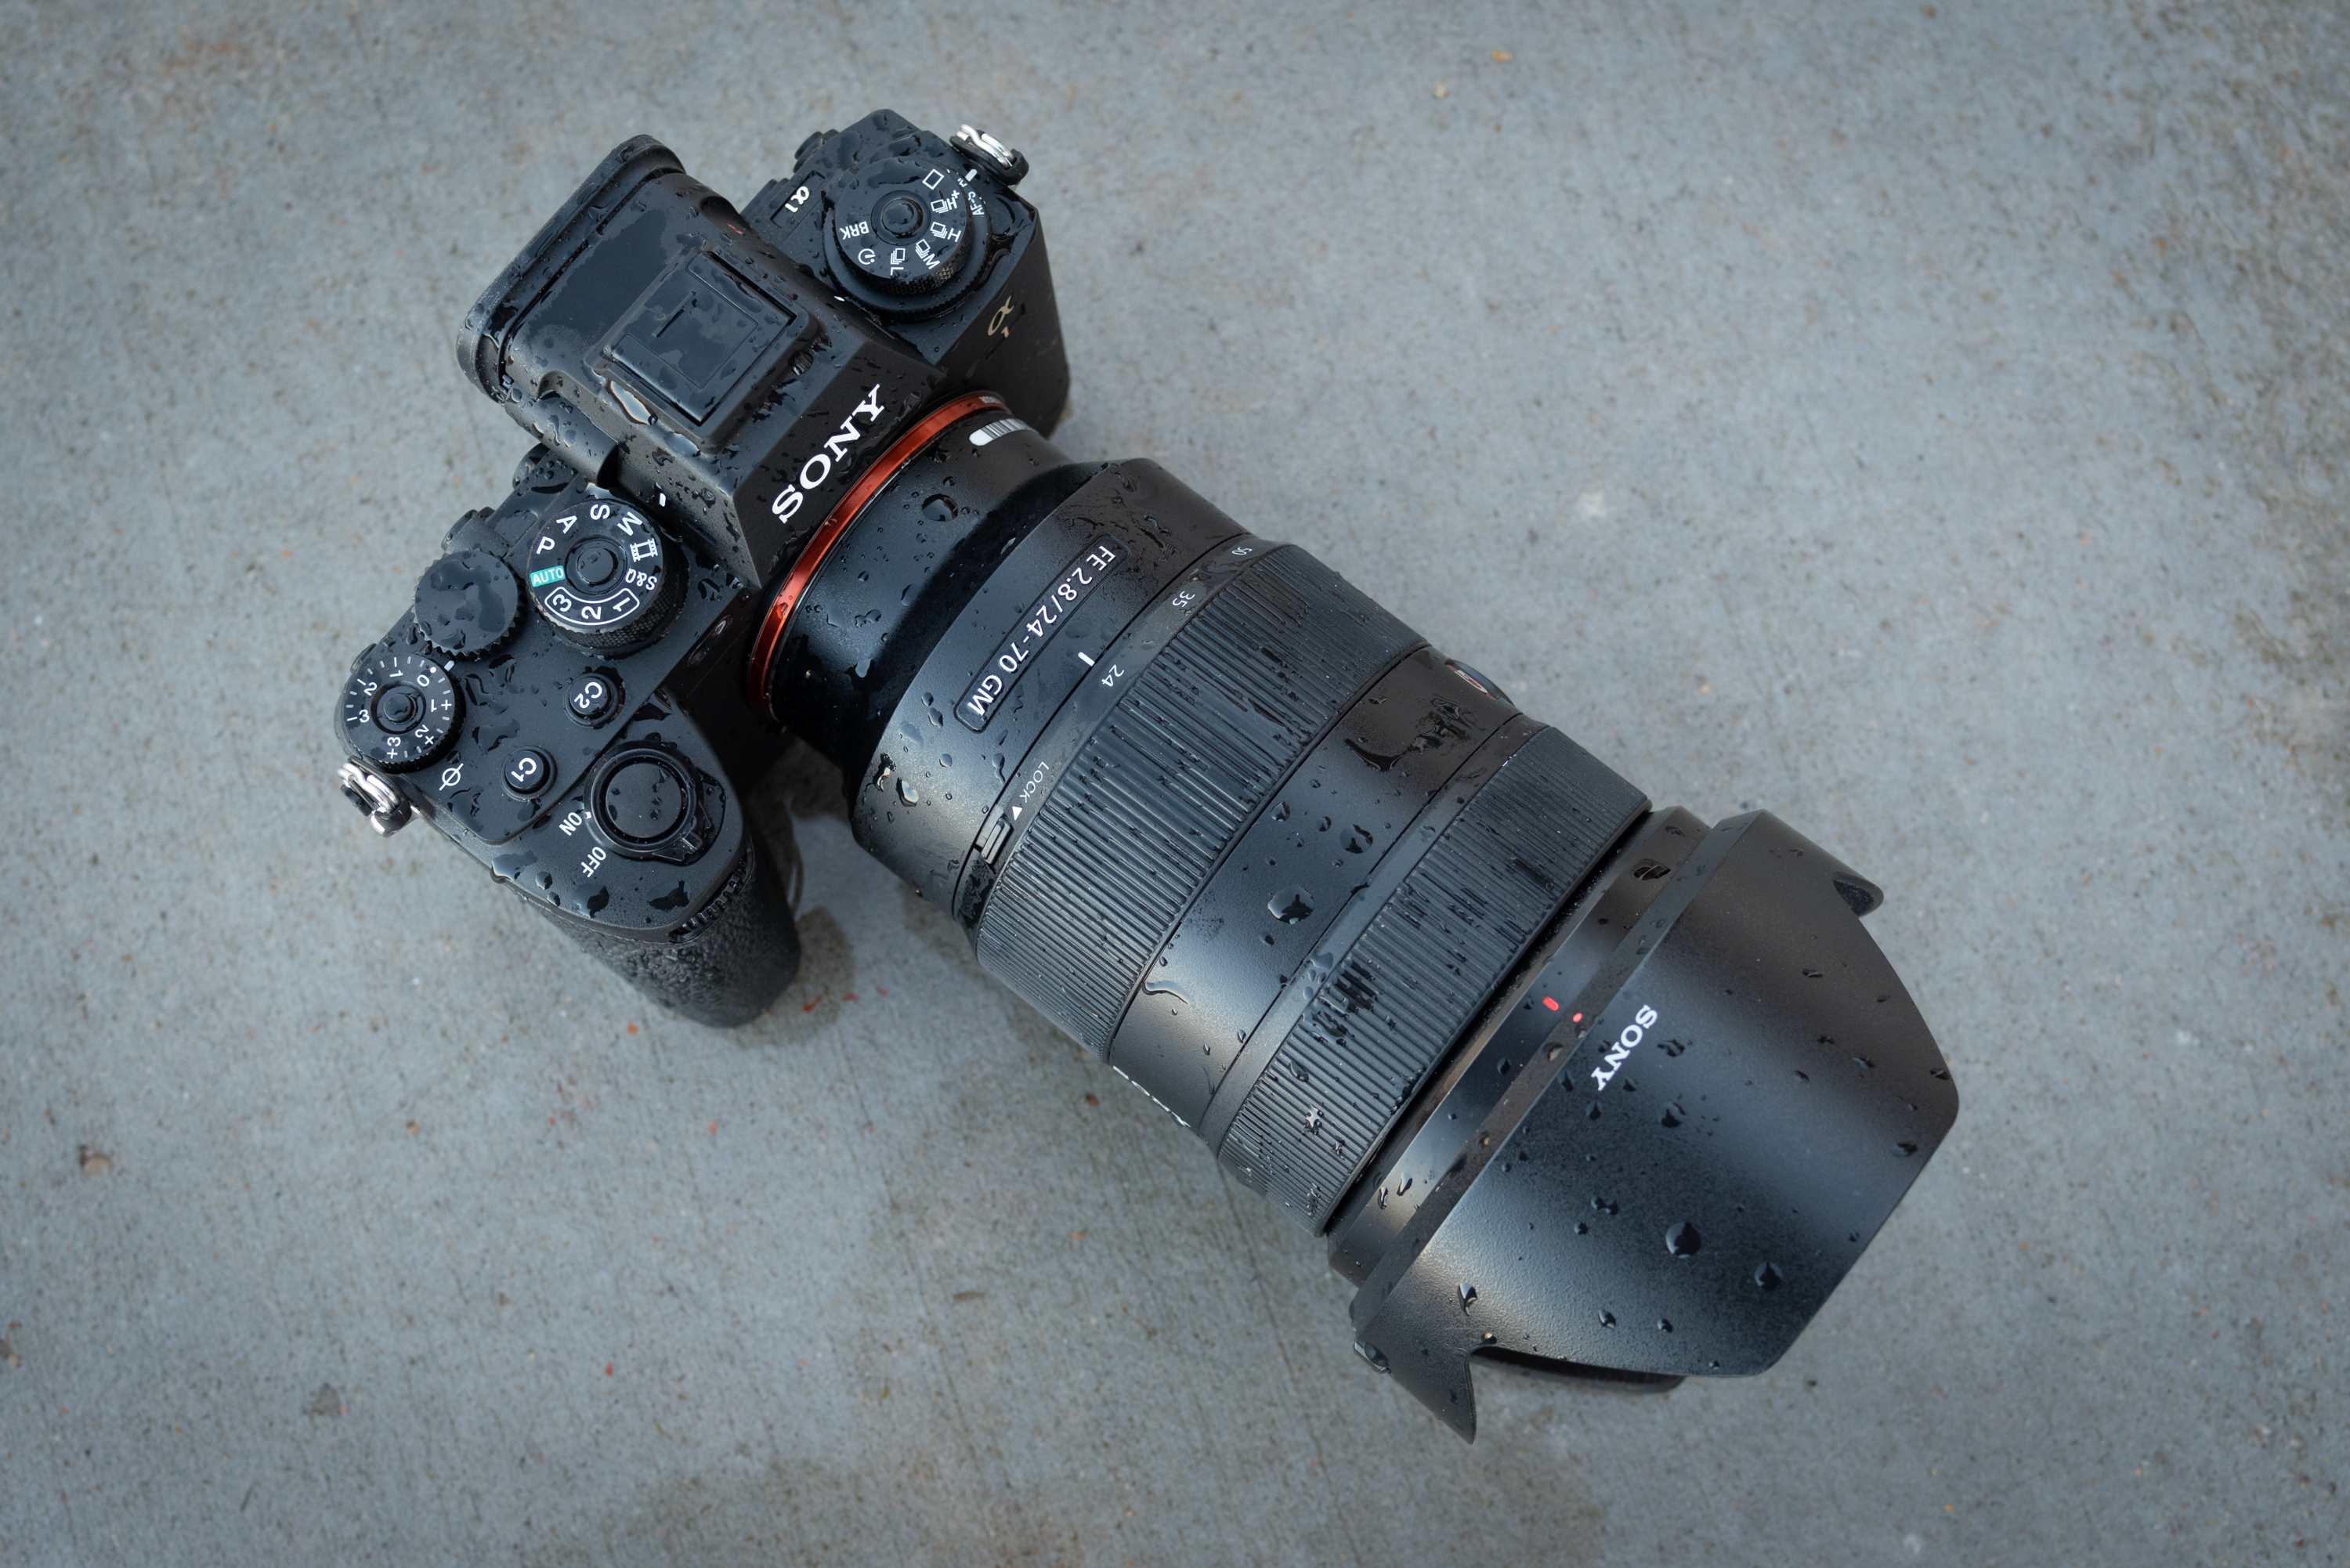 The Best Full Frame Mirrorless Cameras for Professional Photographers